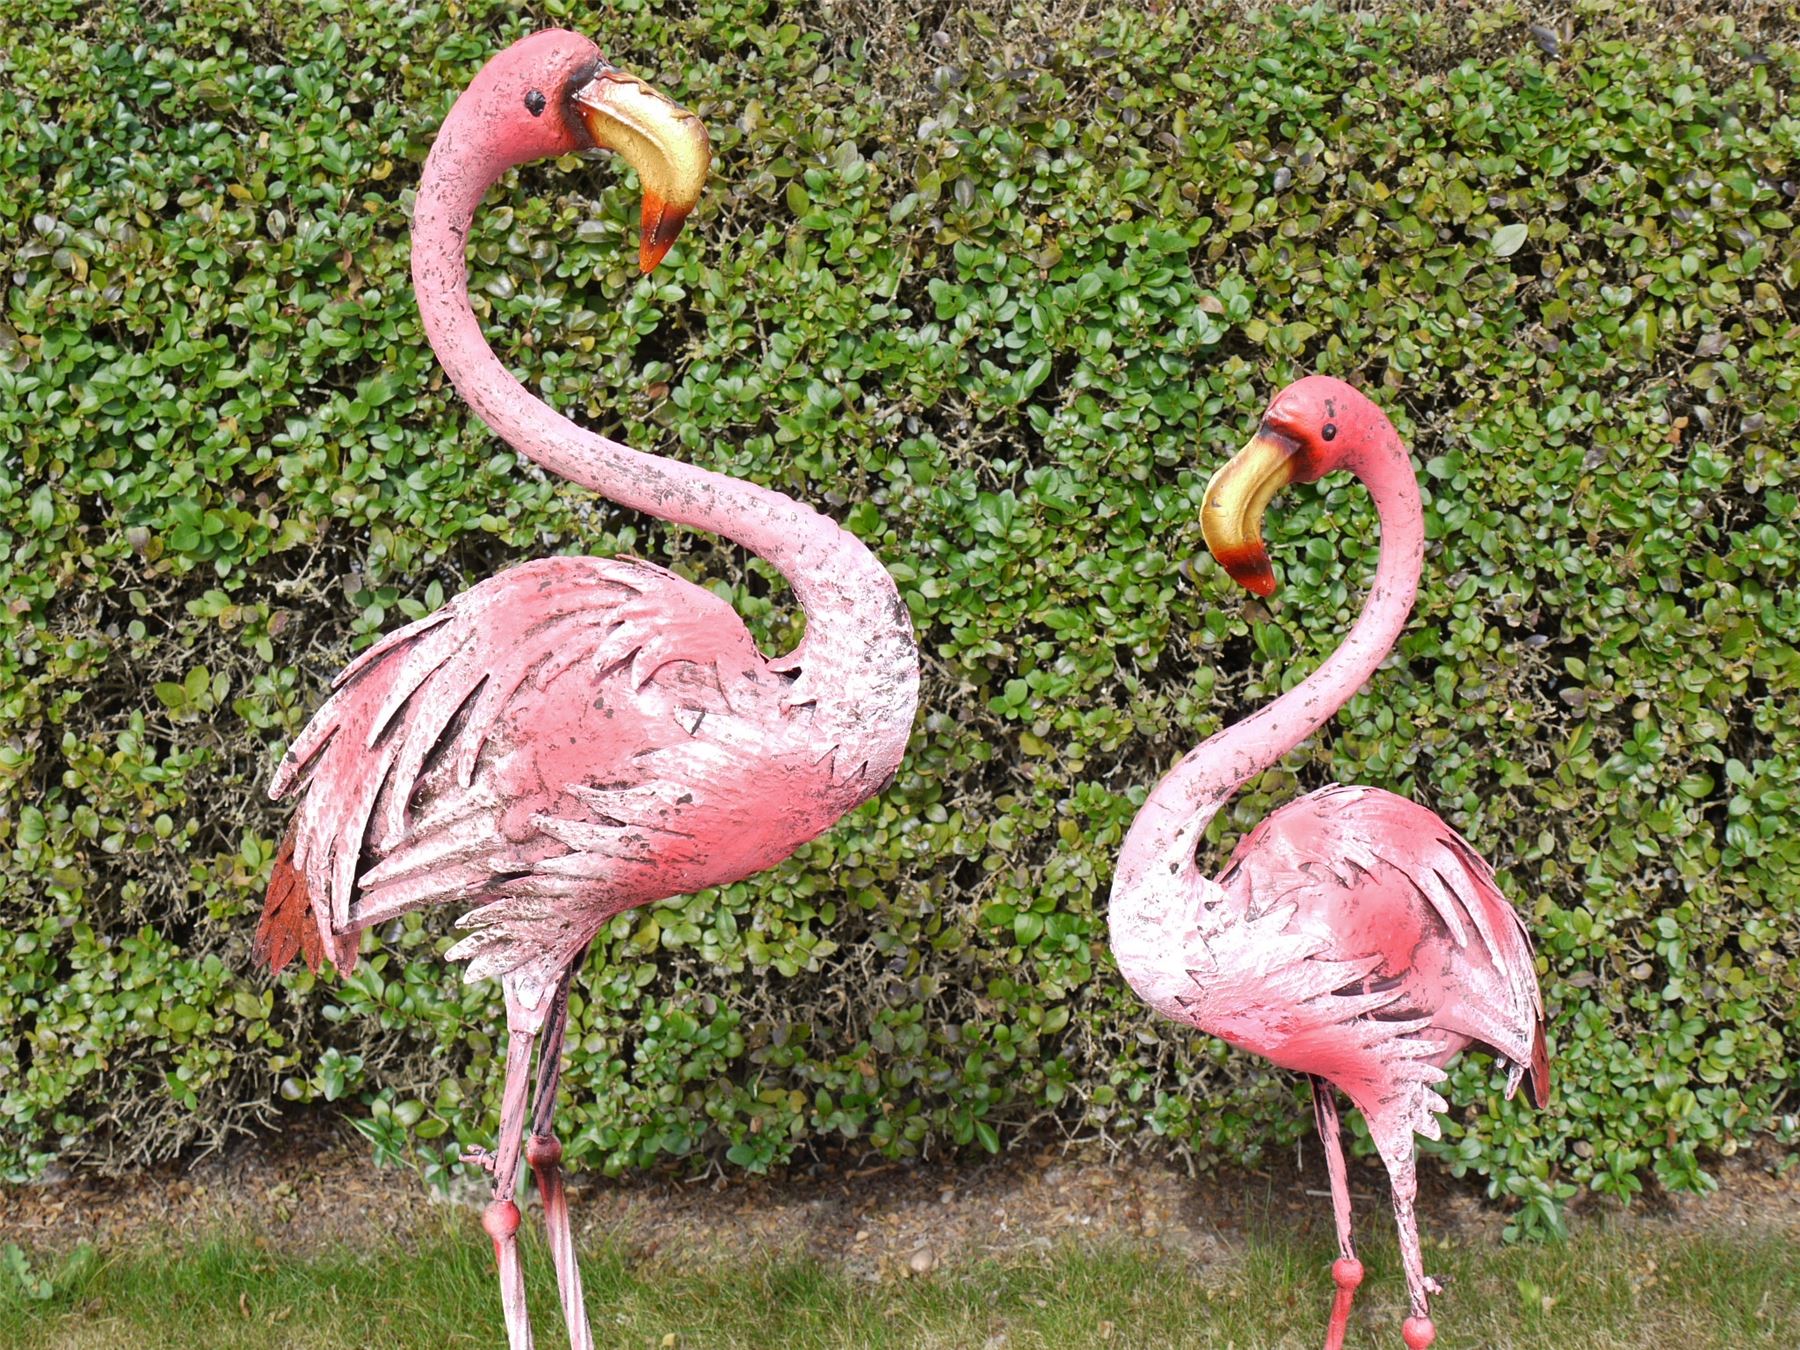 Francis the Flamingo Garden Ornaments / Statues - in Two Sizes | eBay